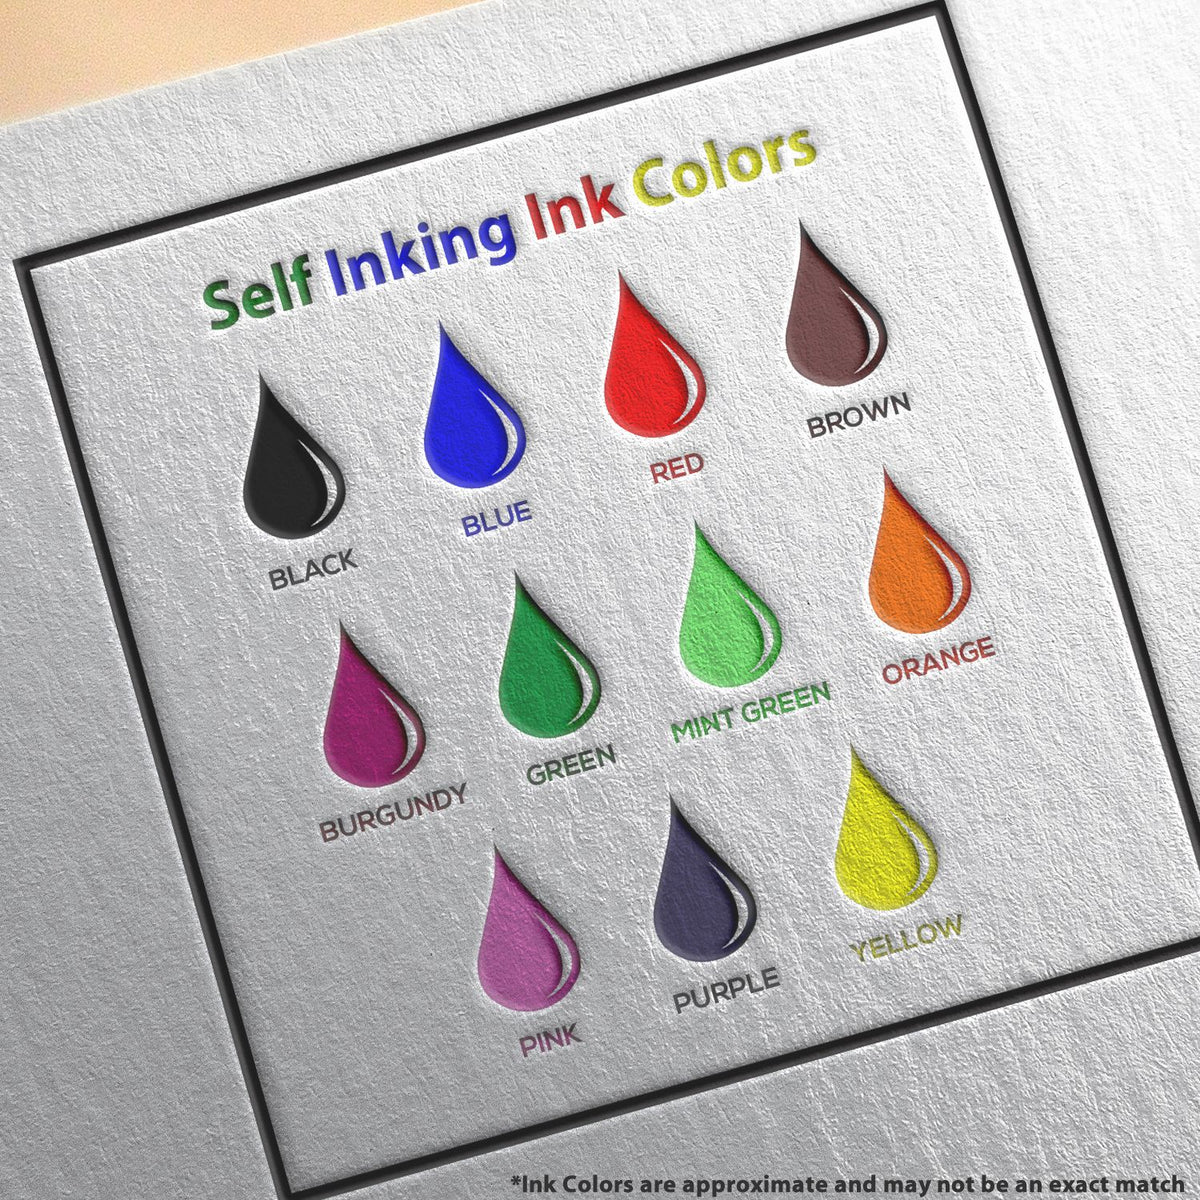 A picture showing the different ink colors or hues available for the Heavy-Duty Puerto Rico Rectangular Notary Stamp product.